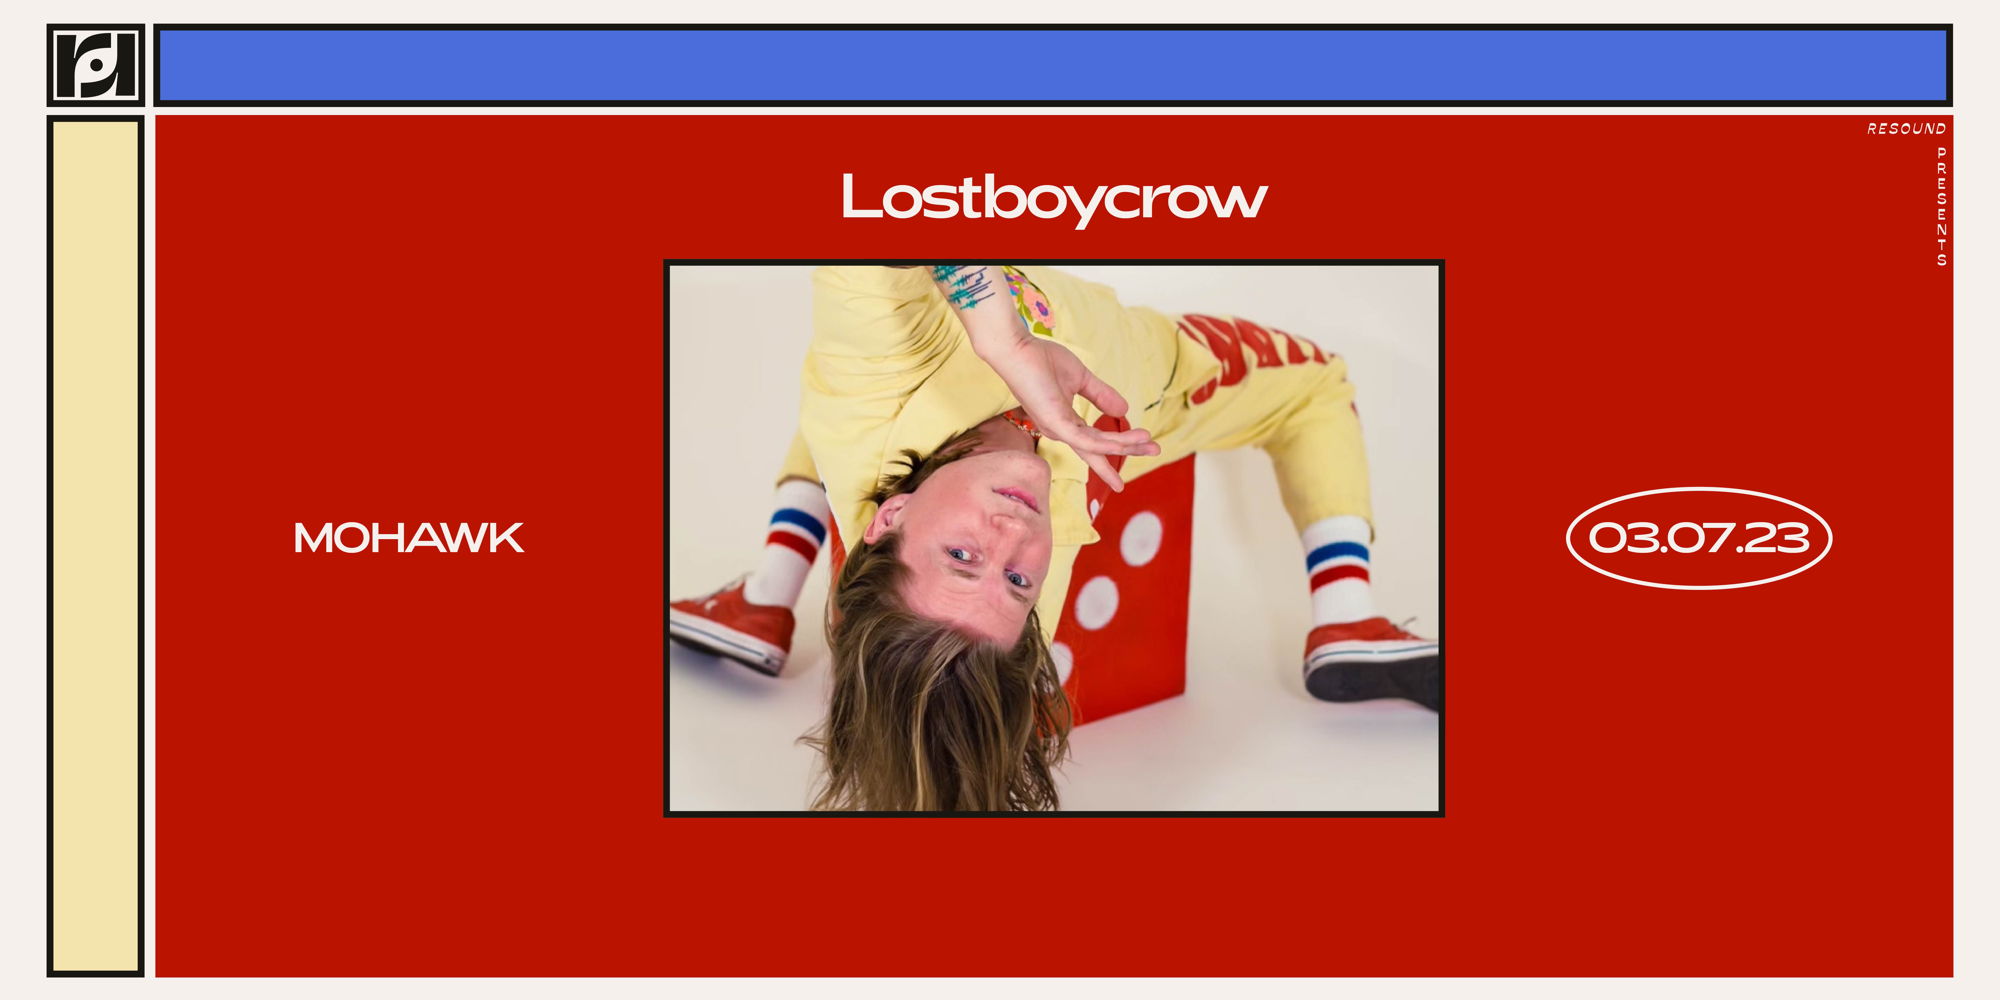 Resound Presents: Lostboycrow at Mohawk on 3/7/23 promotional image